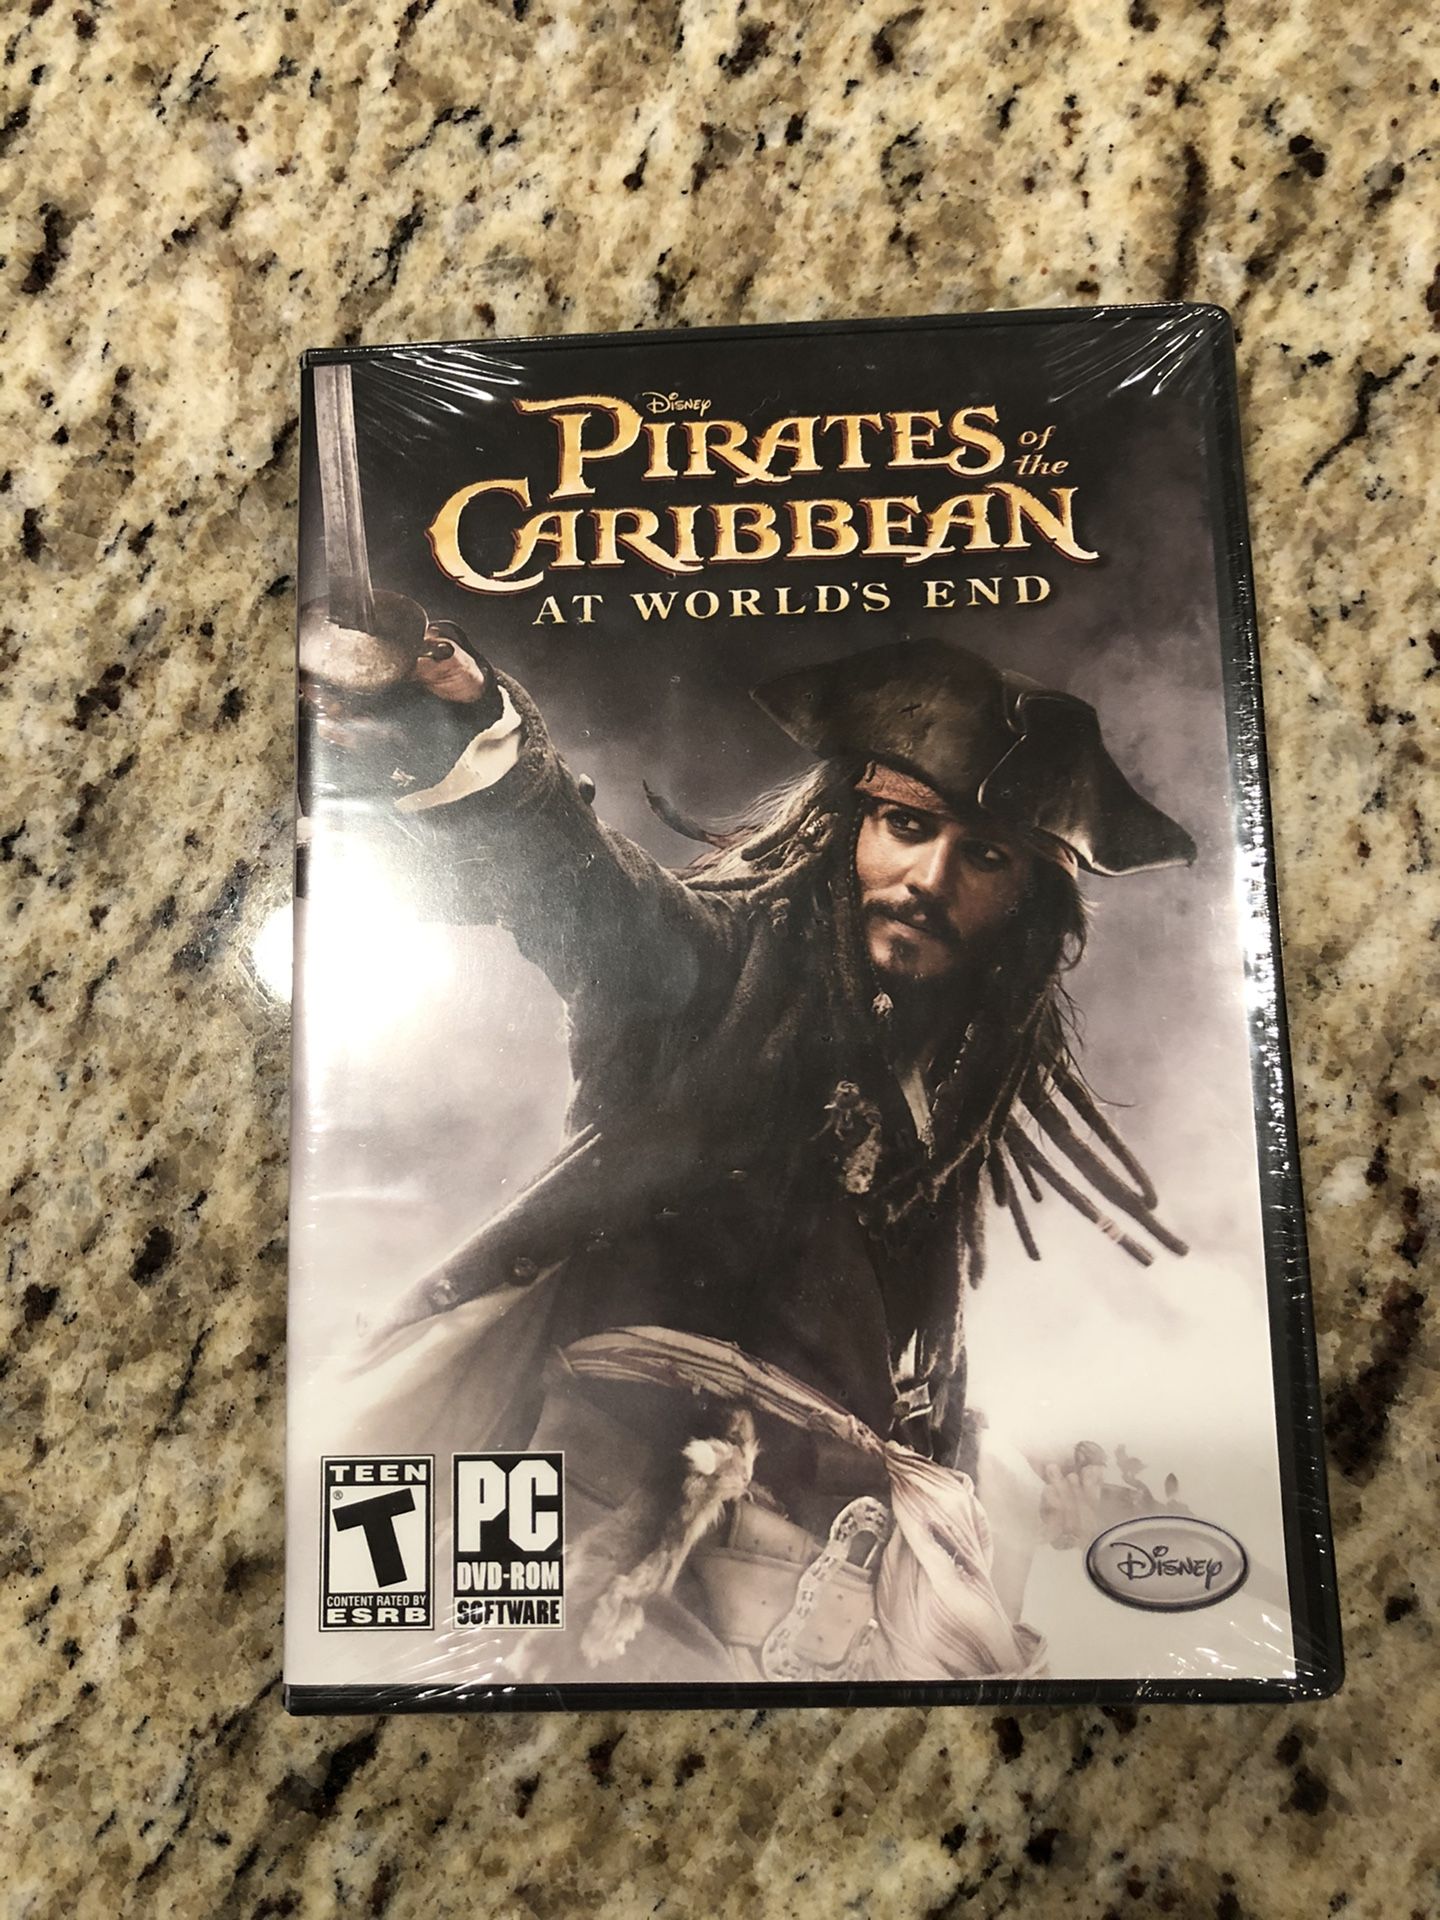 Pirates of the Caribbean at world’s end PC game